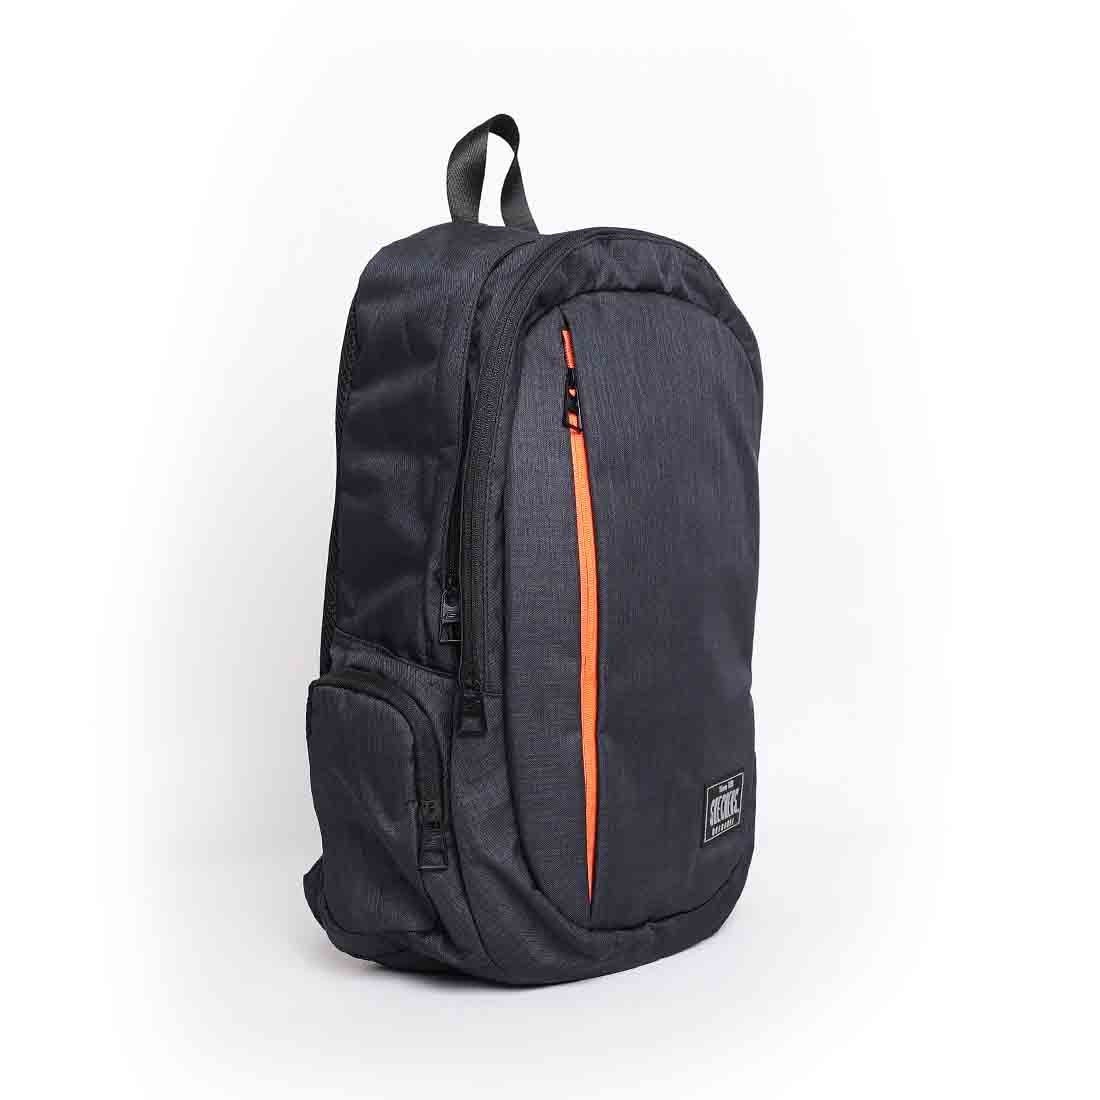 3 COMPARTMENTS BACKPACK